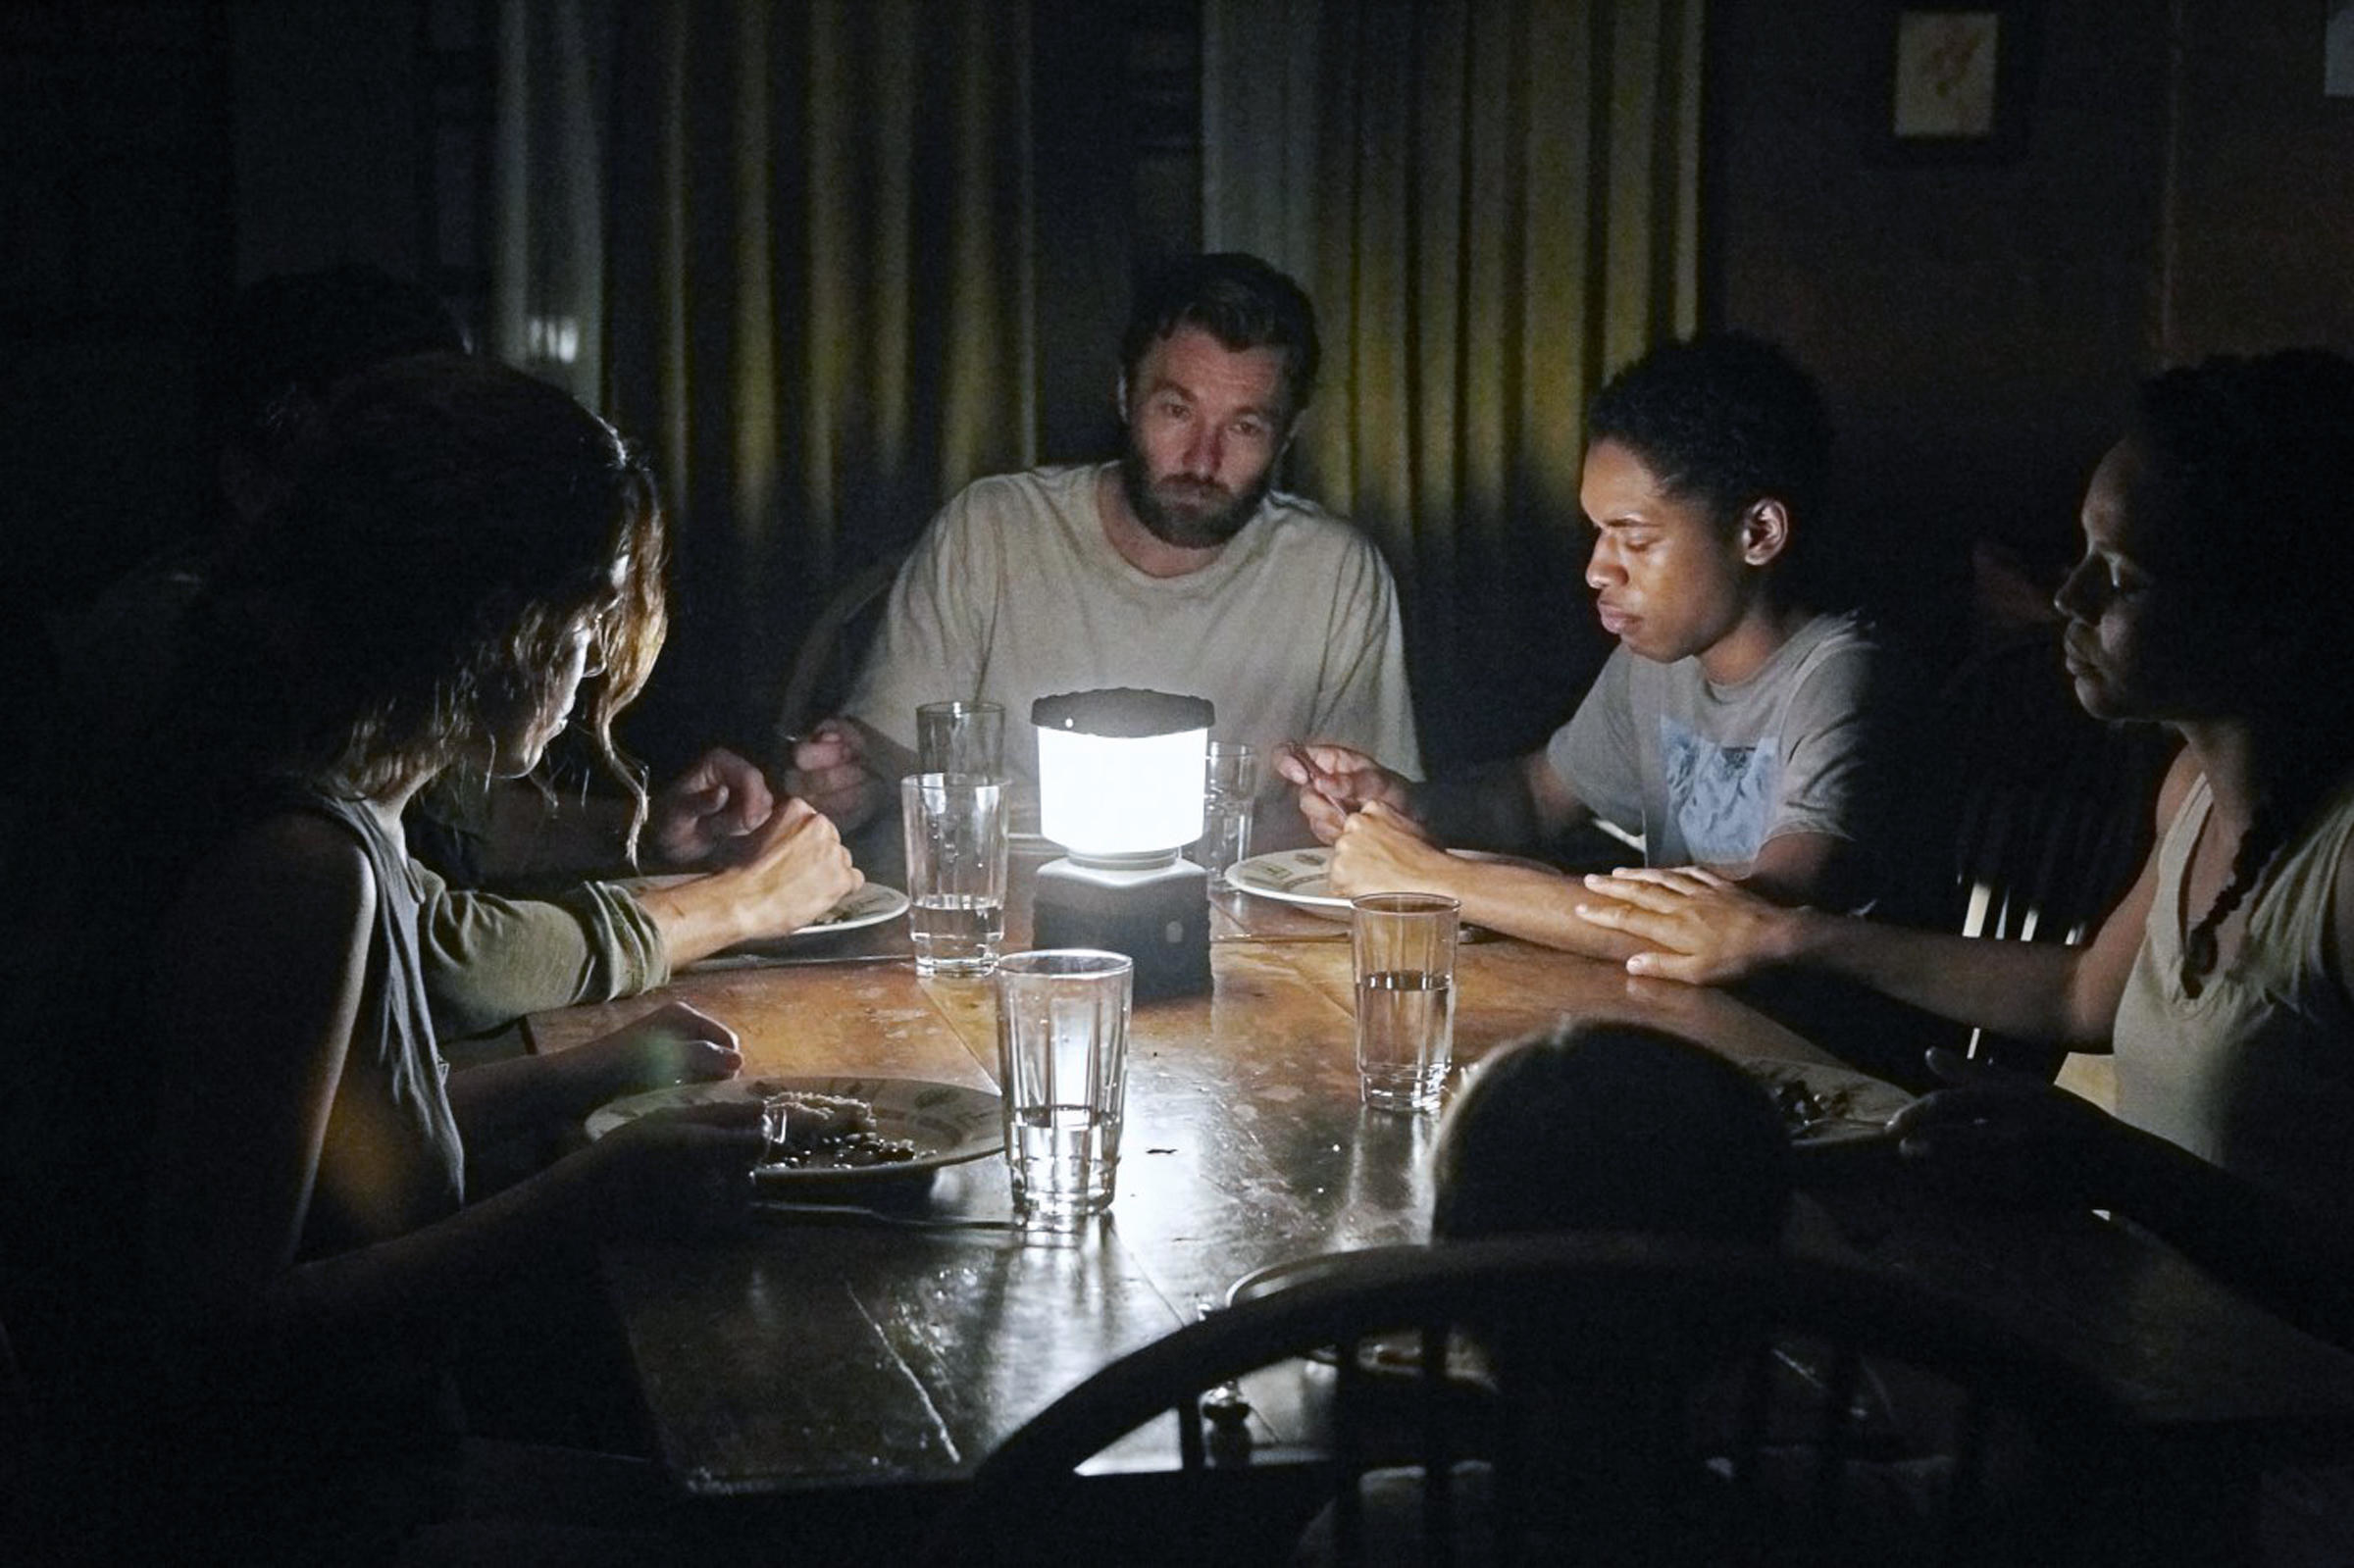 A makeshift family gathers around for dinner in a dimly lit room illuminated by a lantern